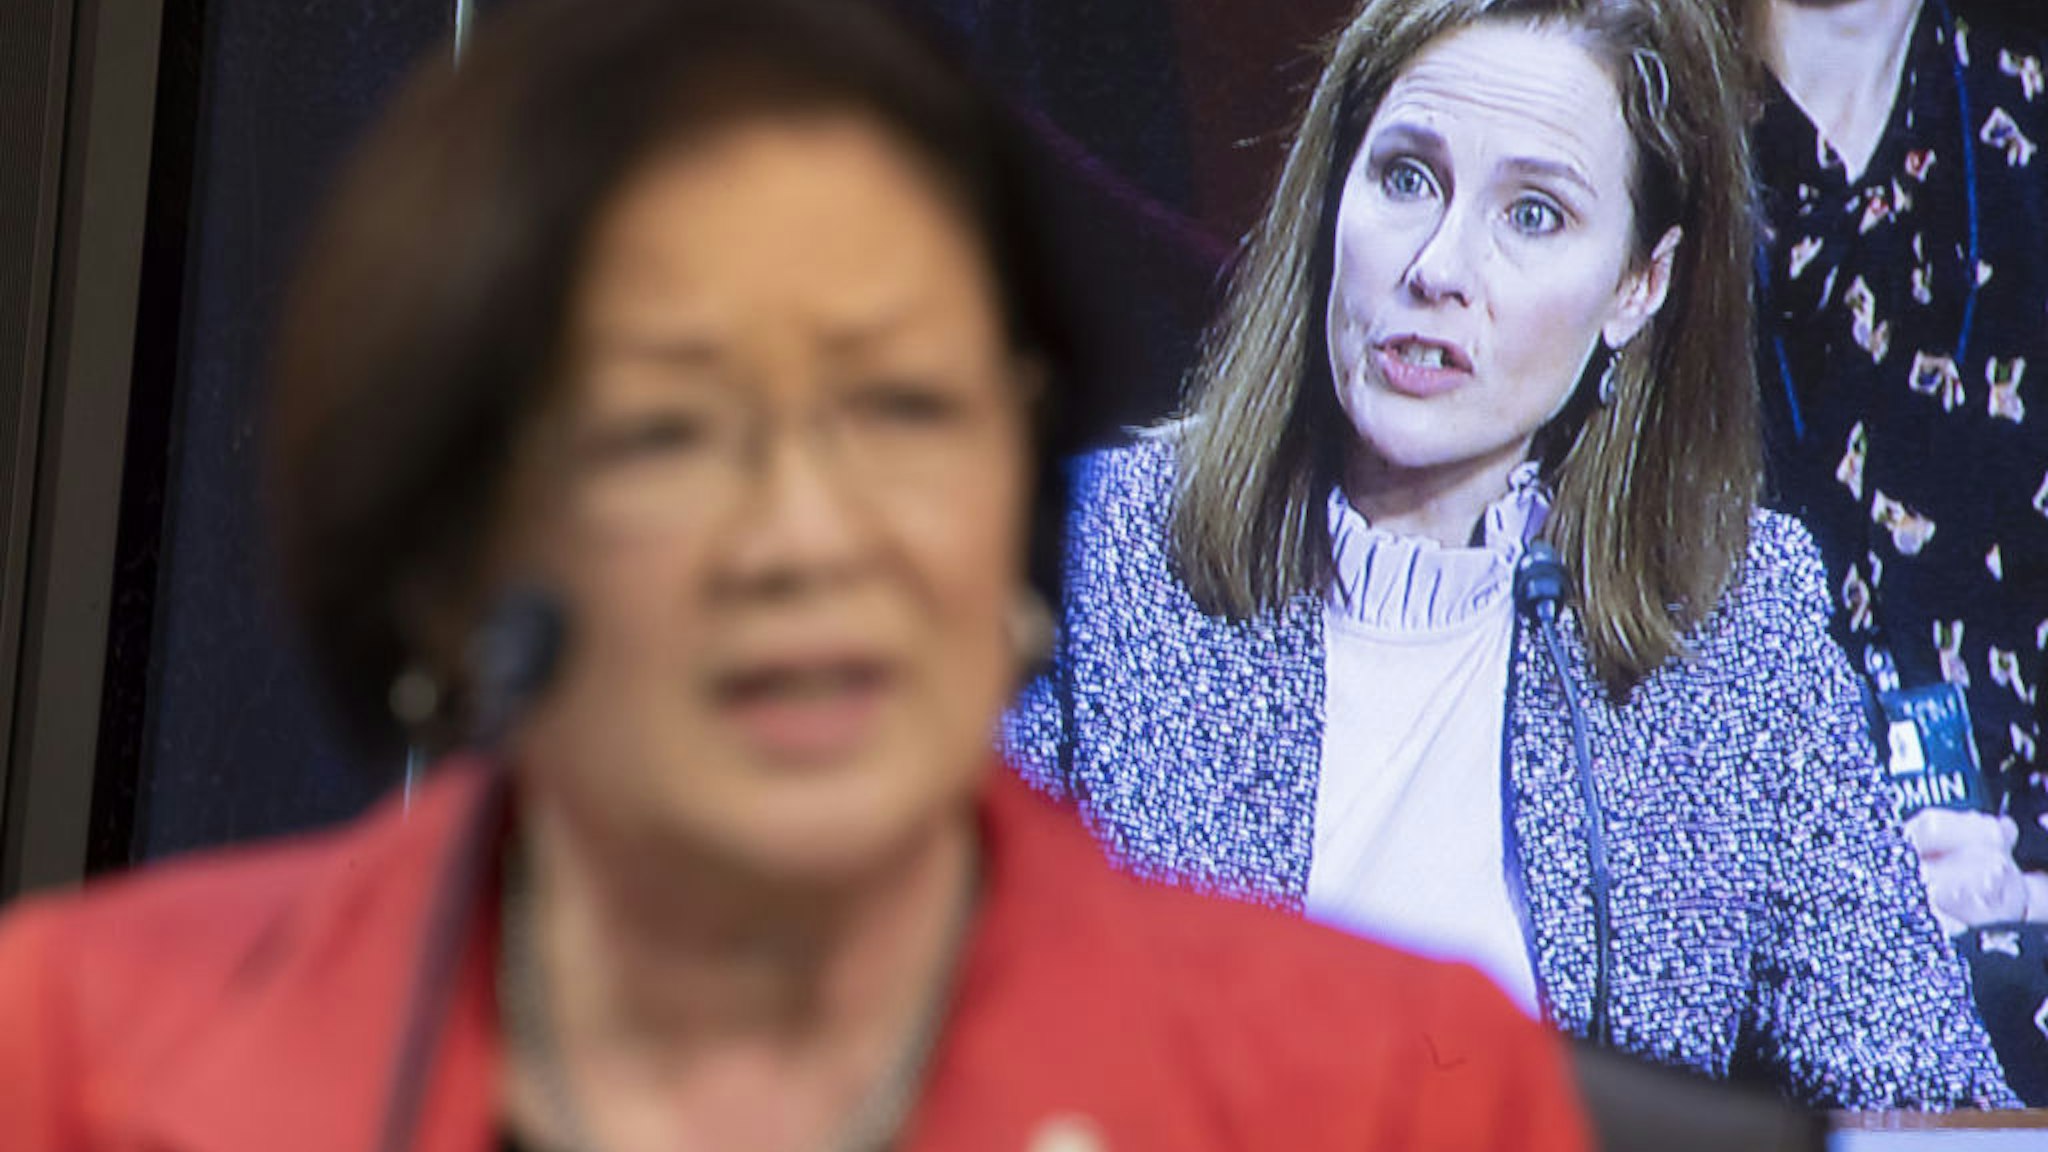 Amy Coney Barrett, U.S. President Donald Trump's nominee for associate justice of the U.S. Supreme Court, is displayed on a television monitor as Senator Mazie Hirono, a Democrat from Hawaii, left, speaks during a Senate Judiciary Committee confirmation hearing in Washington, D.C., U.S., on Wednesday, Oct. 14, 2020. Senate Democrats entered a second day of questioning Barrett having made few inroads in their fight to keep her off the Supreme Court and elicited few clues about how she would rule on key cases. Photographer: Michael Reynolds/EPA/Bloomberg